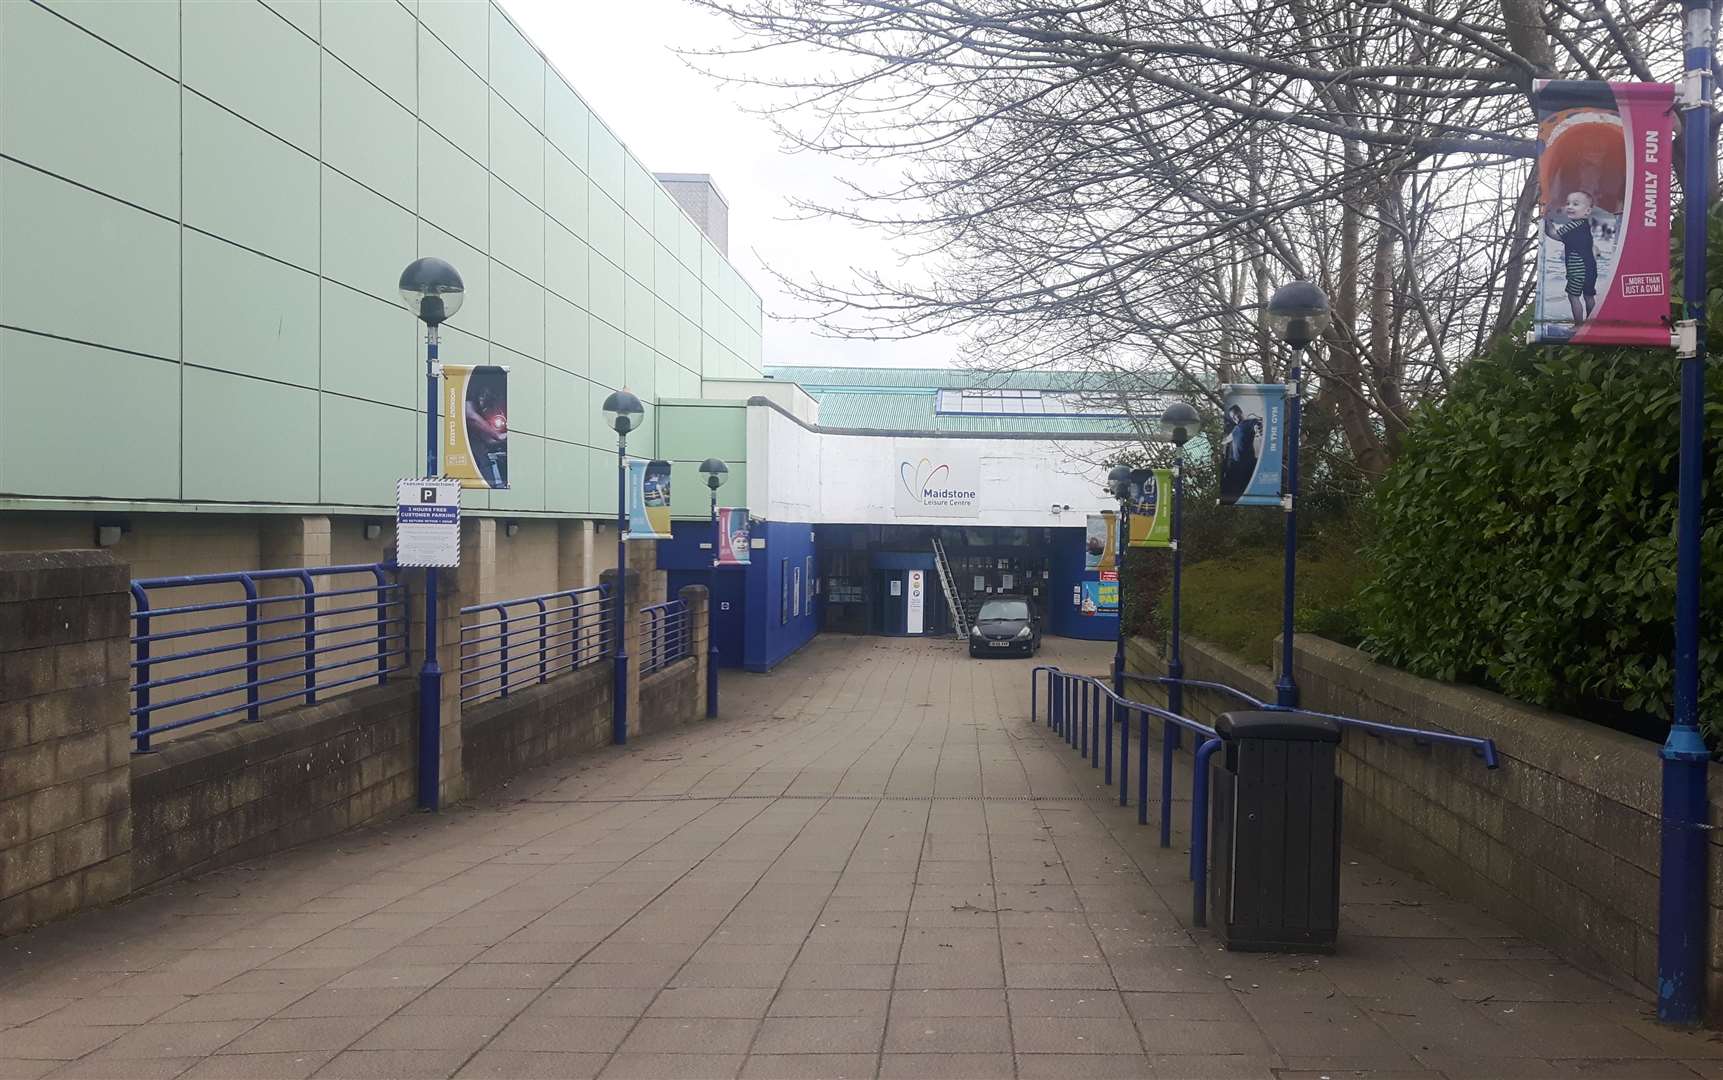 Maidstone Leisure Centre is the town’s main polluter